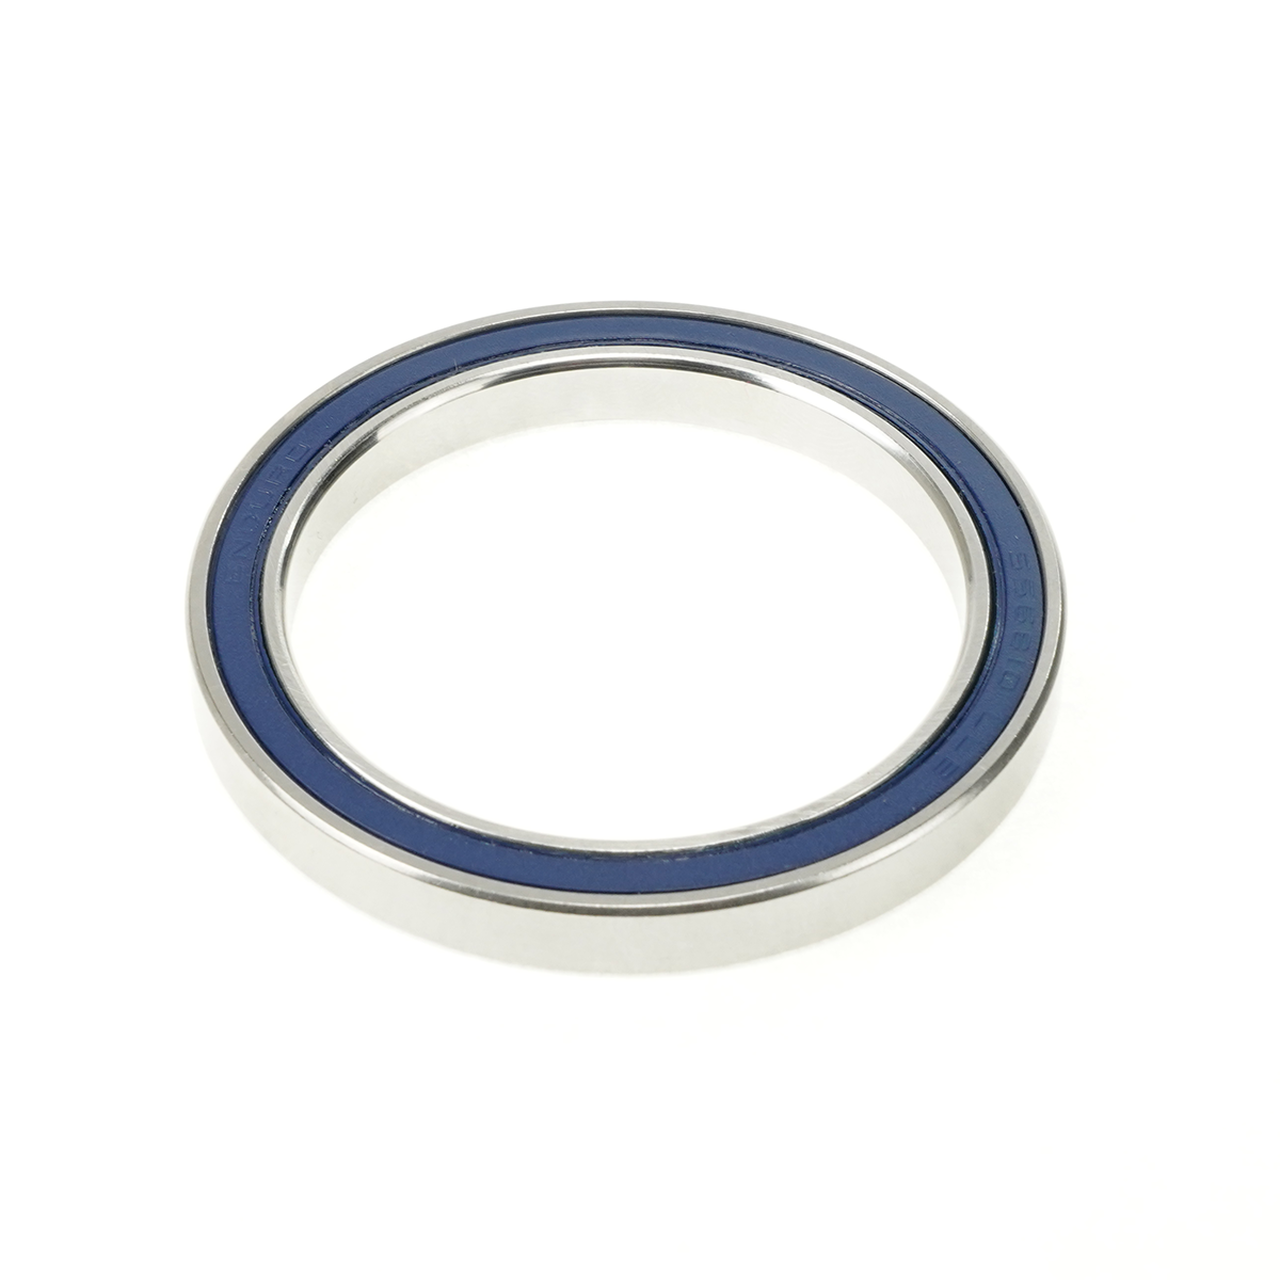 Enduro S6810 LLB - Stainless Steel Radial Bearing (C3 Clearance) - 50mm x 65mm x 7mm